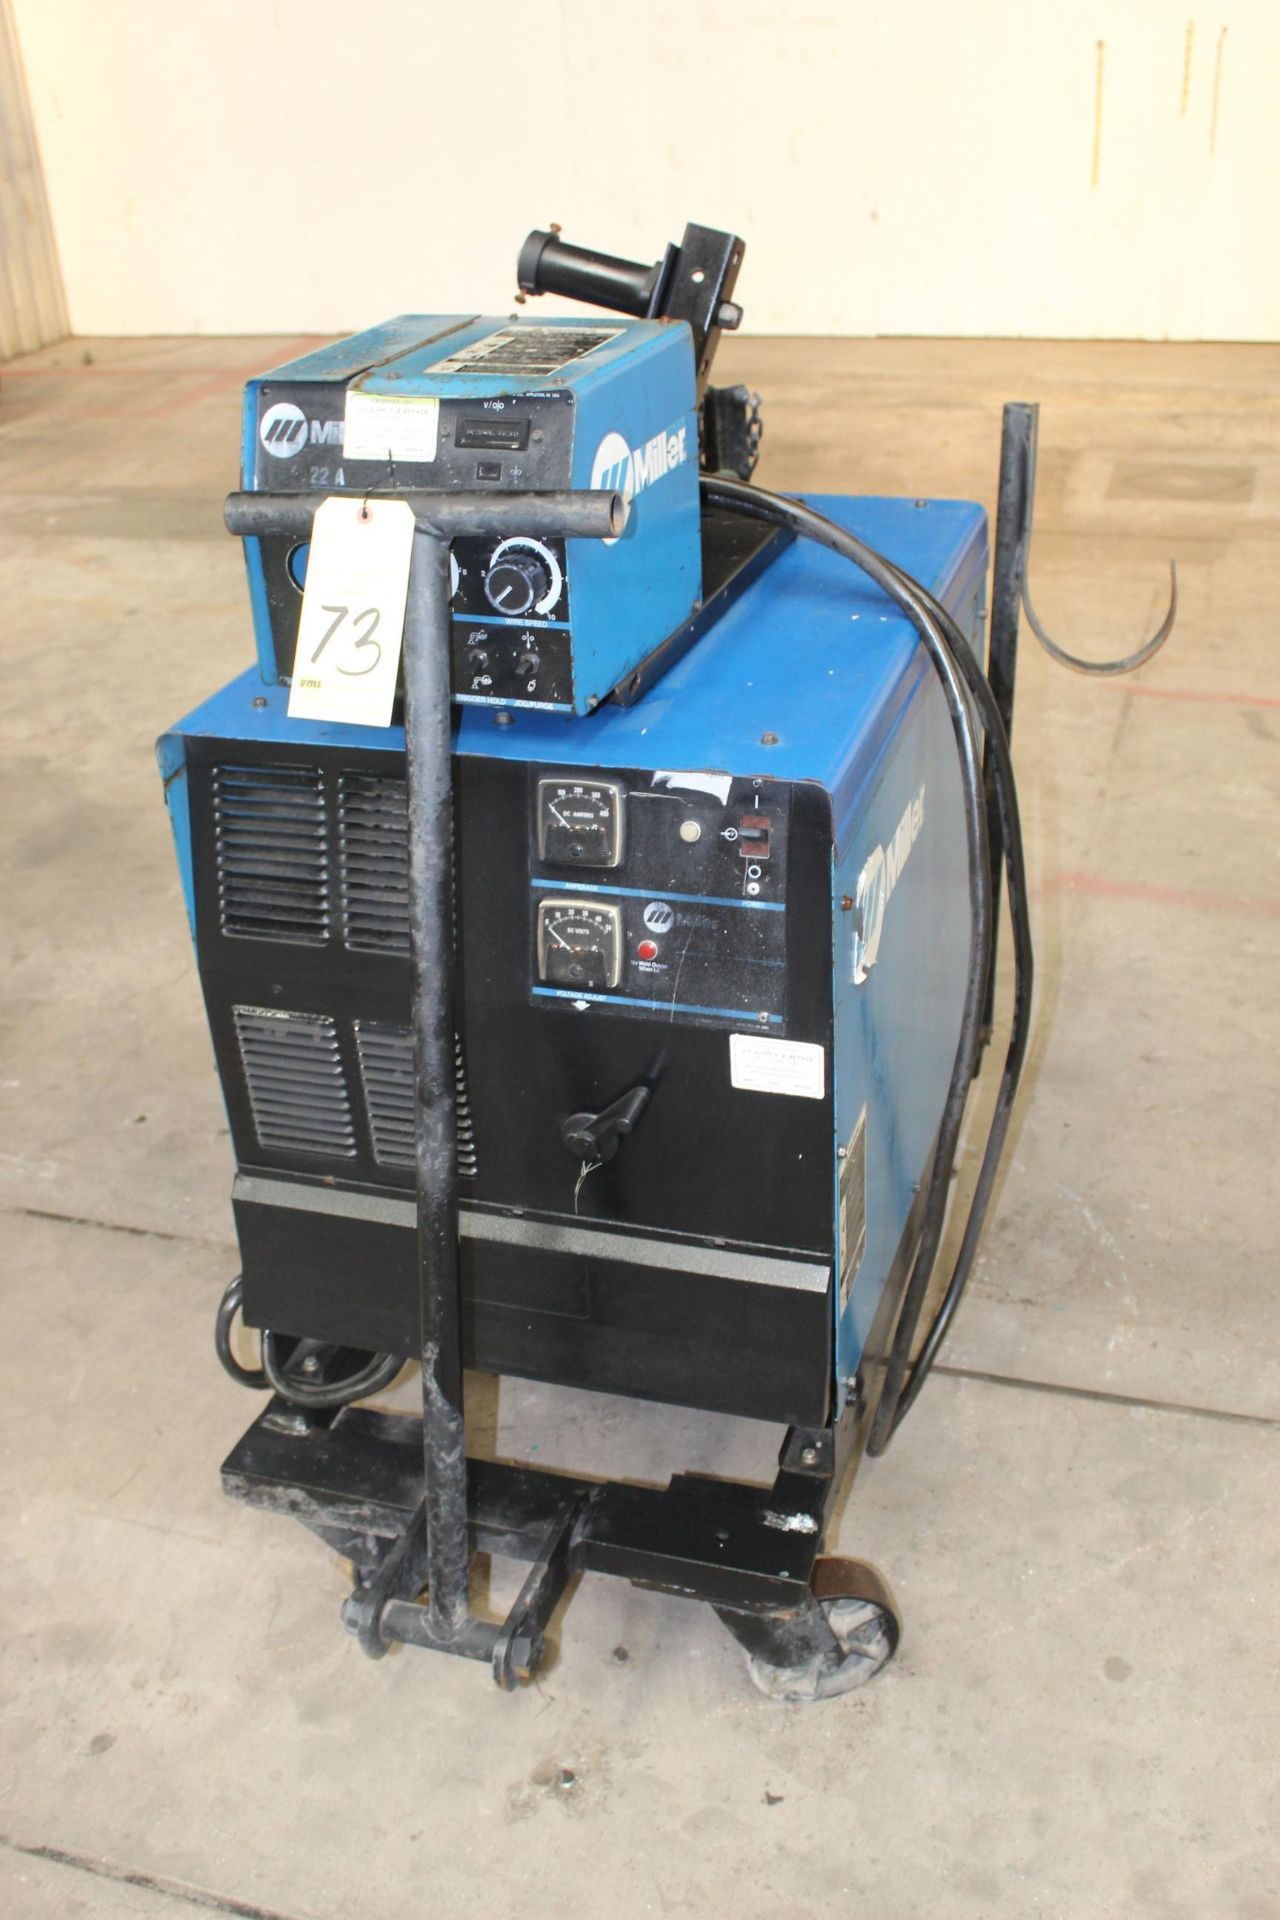 WELDING MACHINE, MILLER MDL. CP302, 300 amps @ 32 v., 100% duty cycle, 22A wire feeder, S/N LA214714